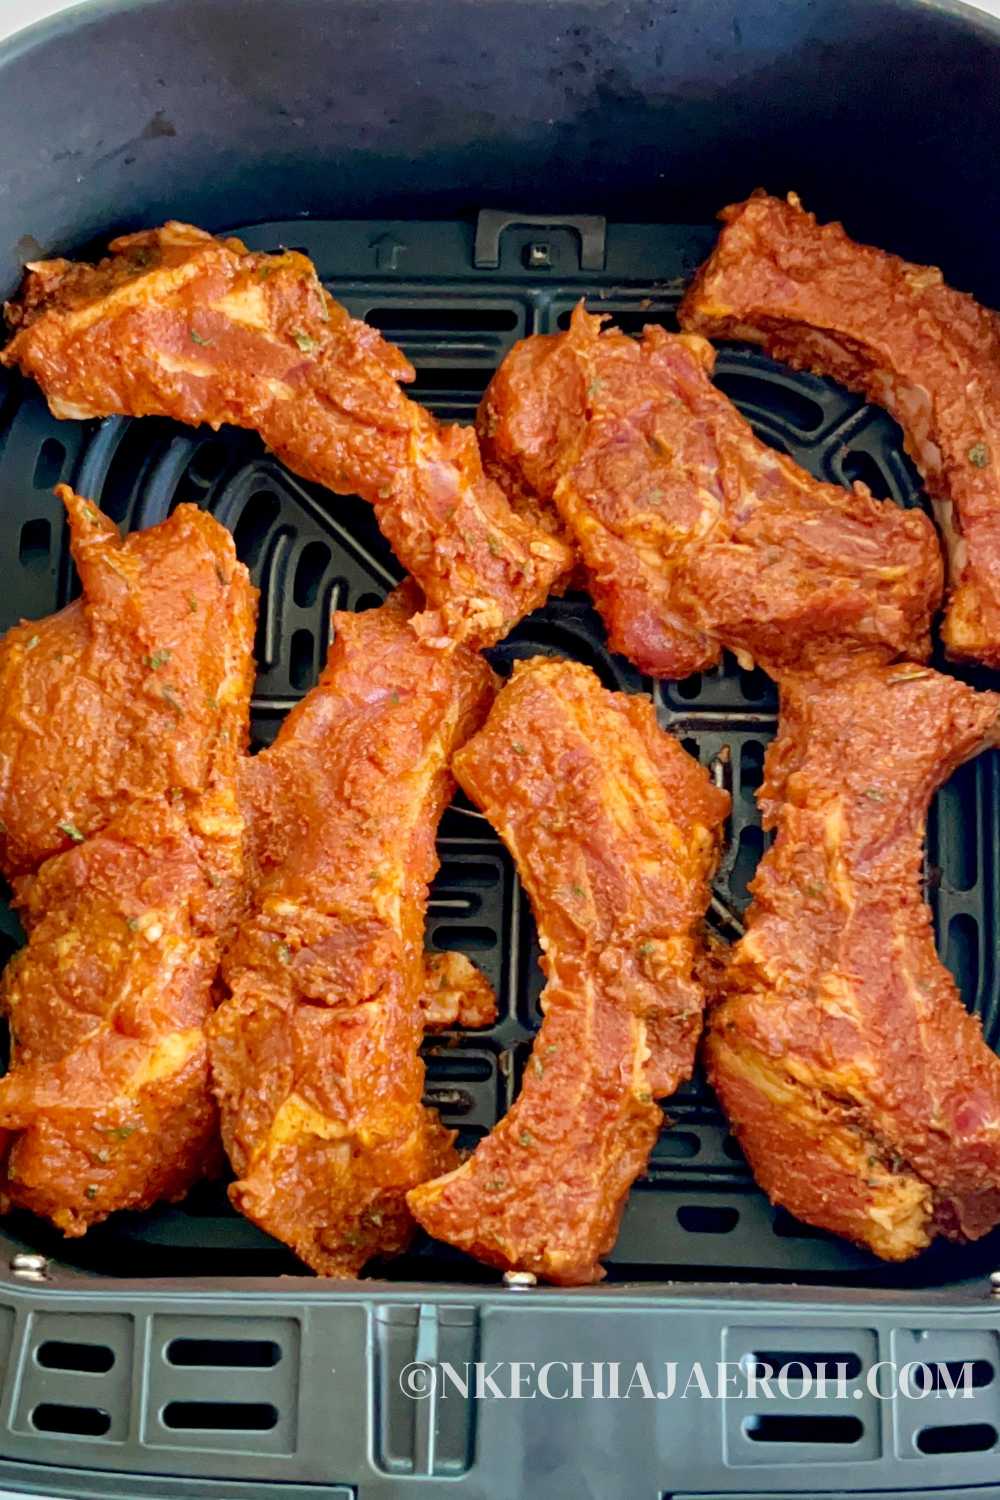 Cooking baby back ribs in the air fryer without barbecue sauce makes the best crispy ribs everyone will enjoy. Super easy-to-make juicy, tender, tasty, and crispy air fryer ribs are perfect for summer BBQs, potluck, and picnics! There’s no need to spend hours making pork ribs in the oven or grill if you have an air fryer. When you put baby pork ribs in the air fryer, they come out absolutely amazing. And with this recipe, you won’t miss BBQ sauce!